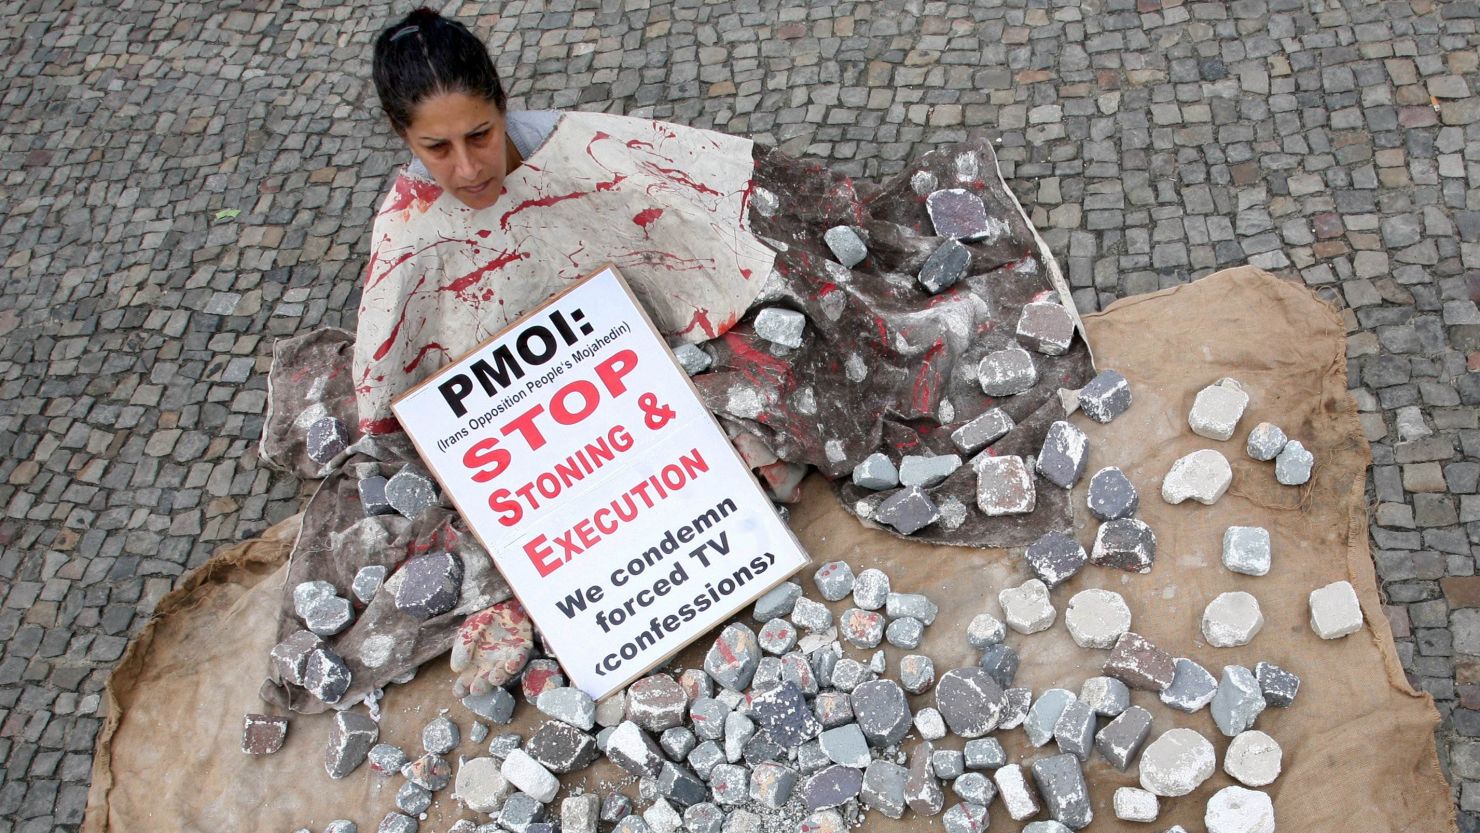 File: A woman demonstrates against stoning and execution on August 13, 2010 outside Berlin's landmark the Brandenburg Gate.